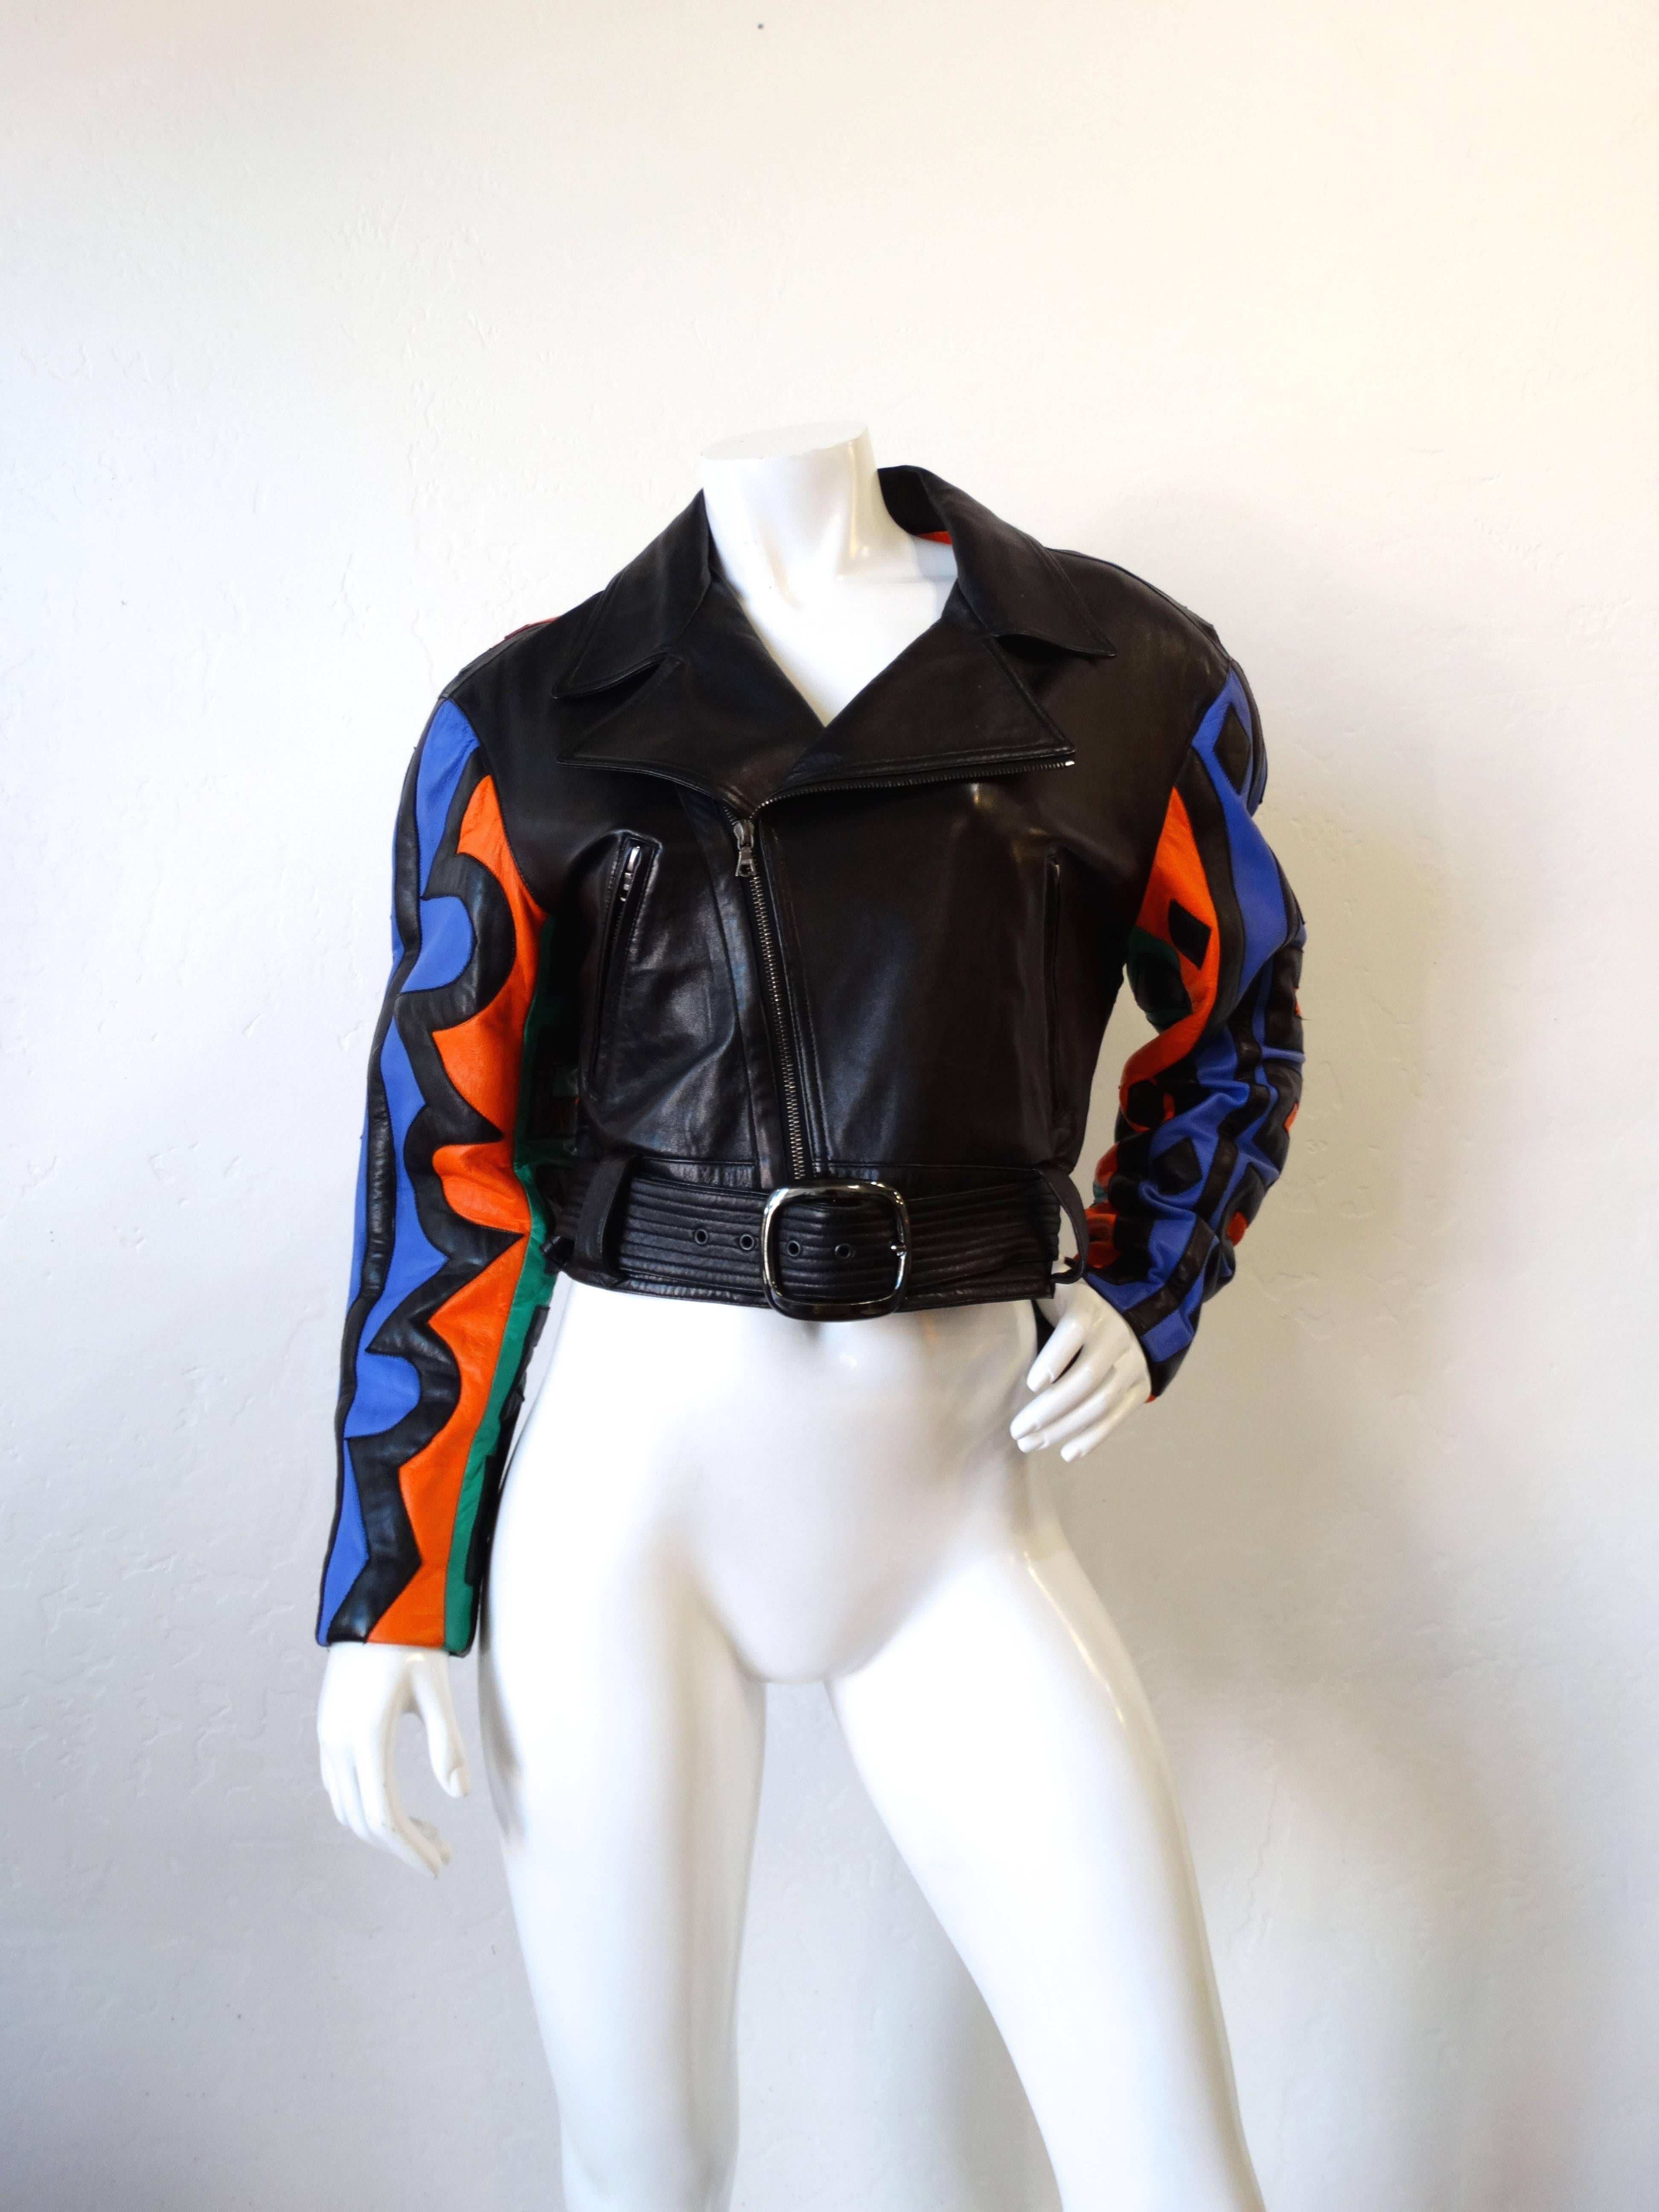 The spirit of the 1990s is alive and well in this incredible Michael Hoban jacket! Solid black leather bodice with super colorful sleeves and back. Tribal print patchwork in shades of teal, blue black and orange. Classic motorcycle jacket